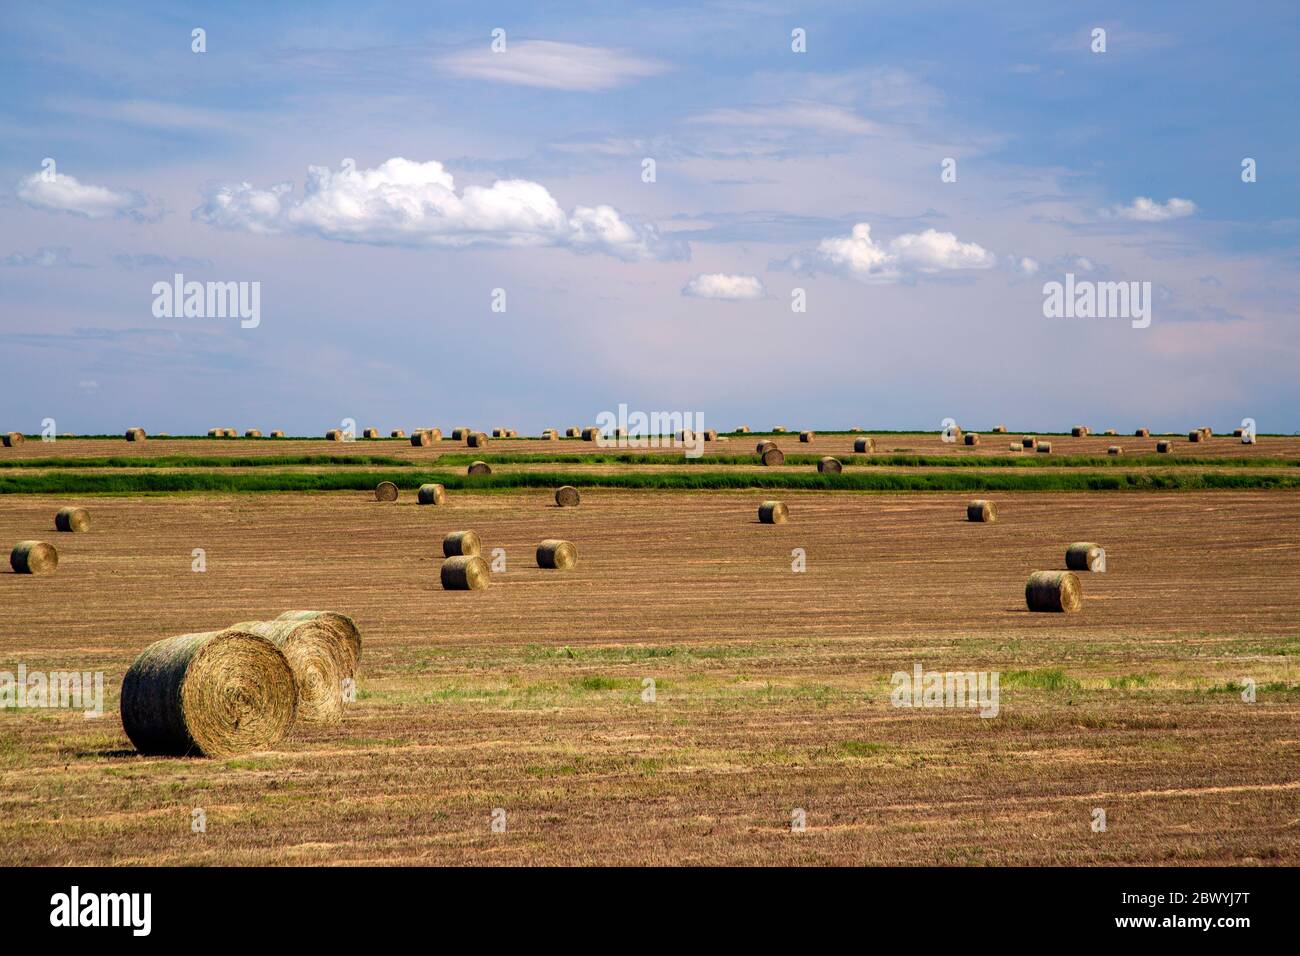 Canadian prairie landscape of a harvested field of agriculture farmland and rolled bales of harvested hay in Alberta, Canada. Stock Photo